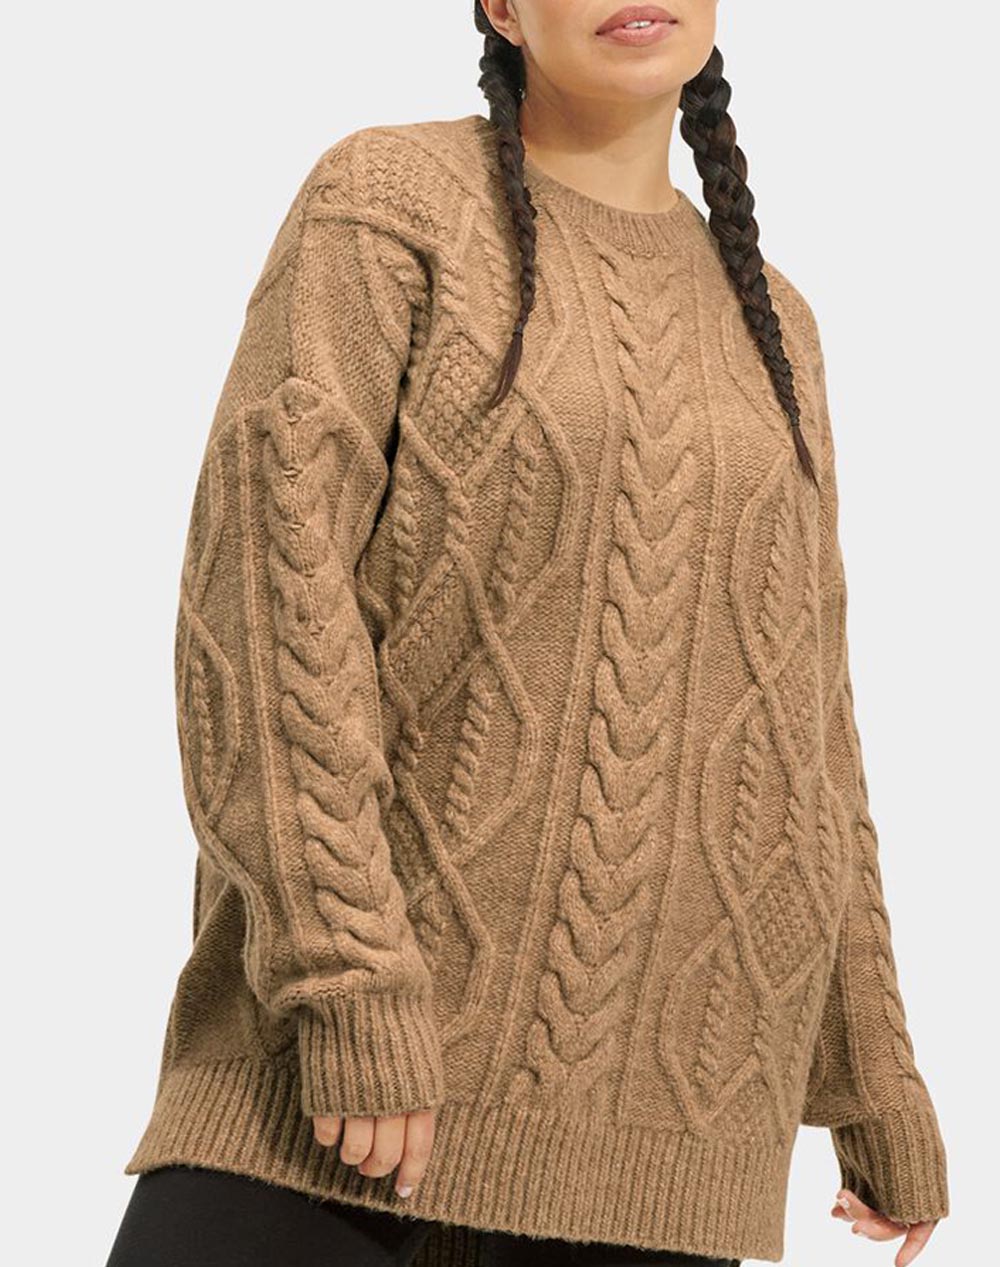 UGG Raelee Cable Knit Sweater Long 1133131-00K4 Camel 3510A0UGG3420006_XR20280